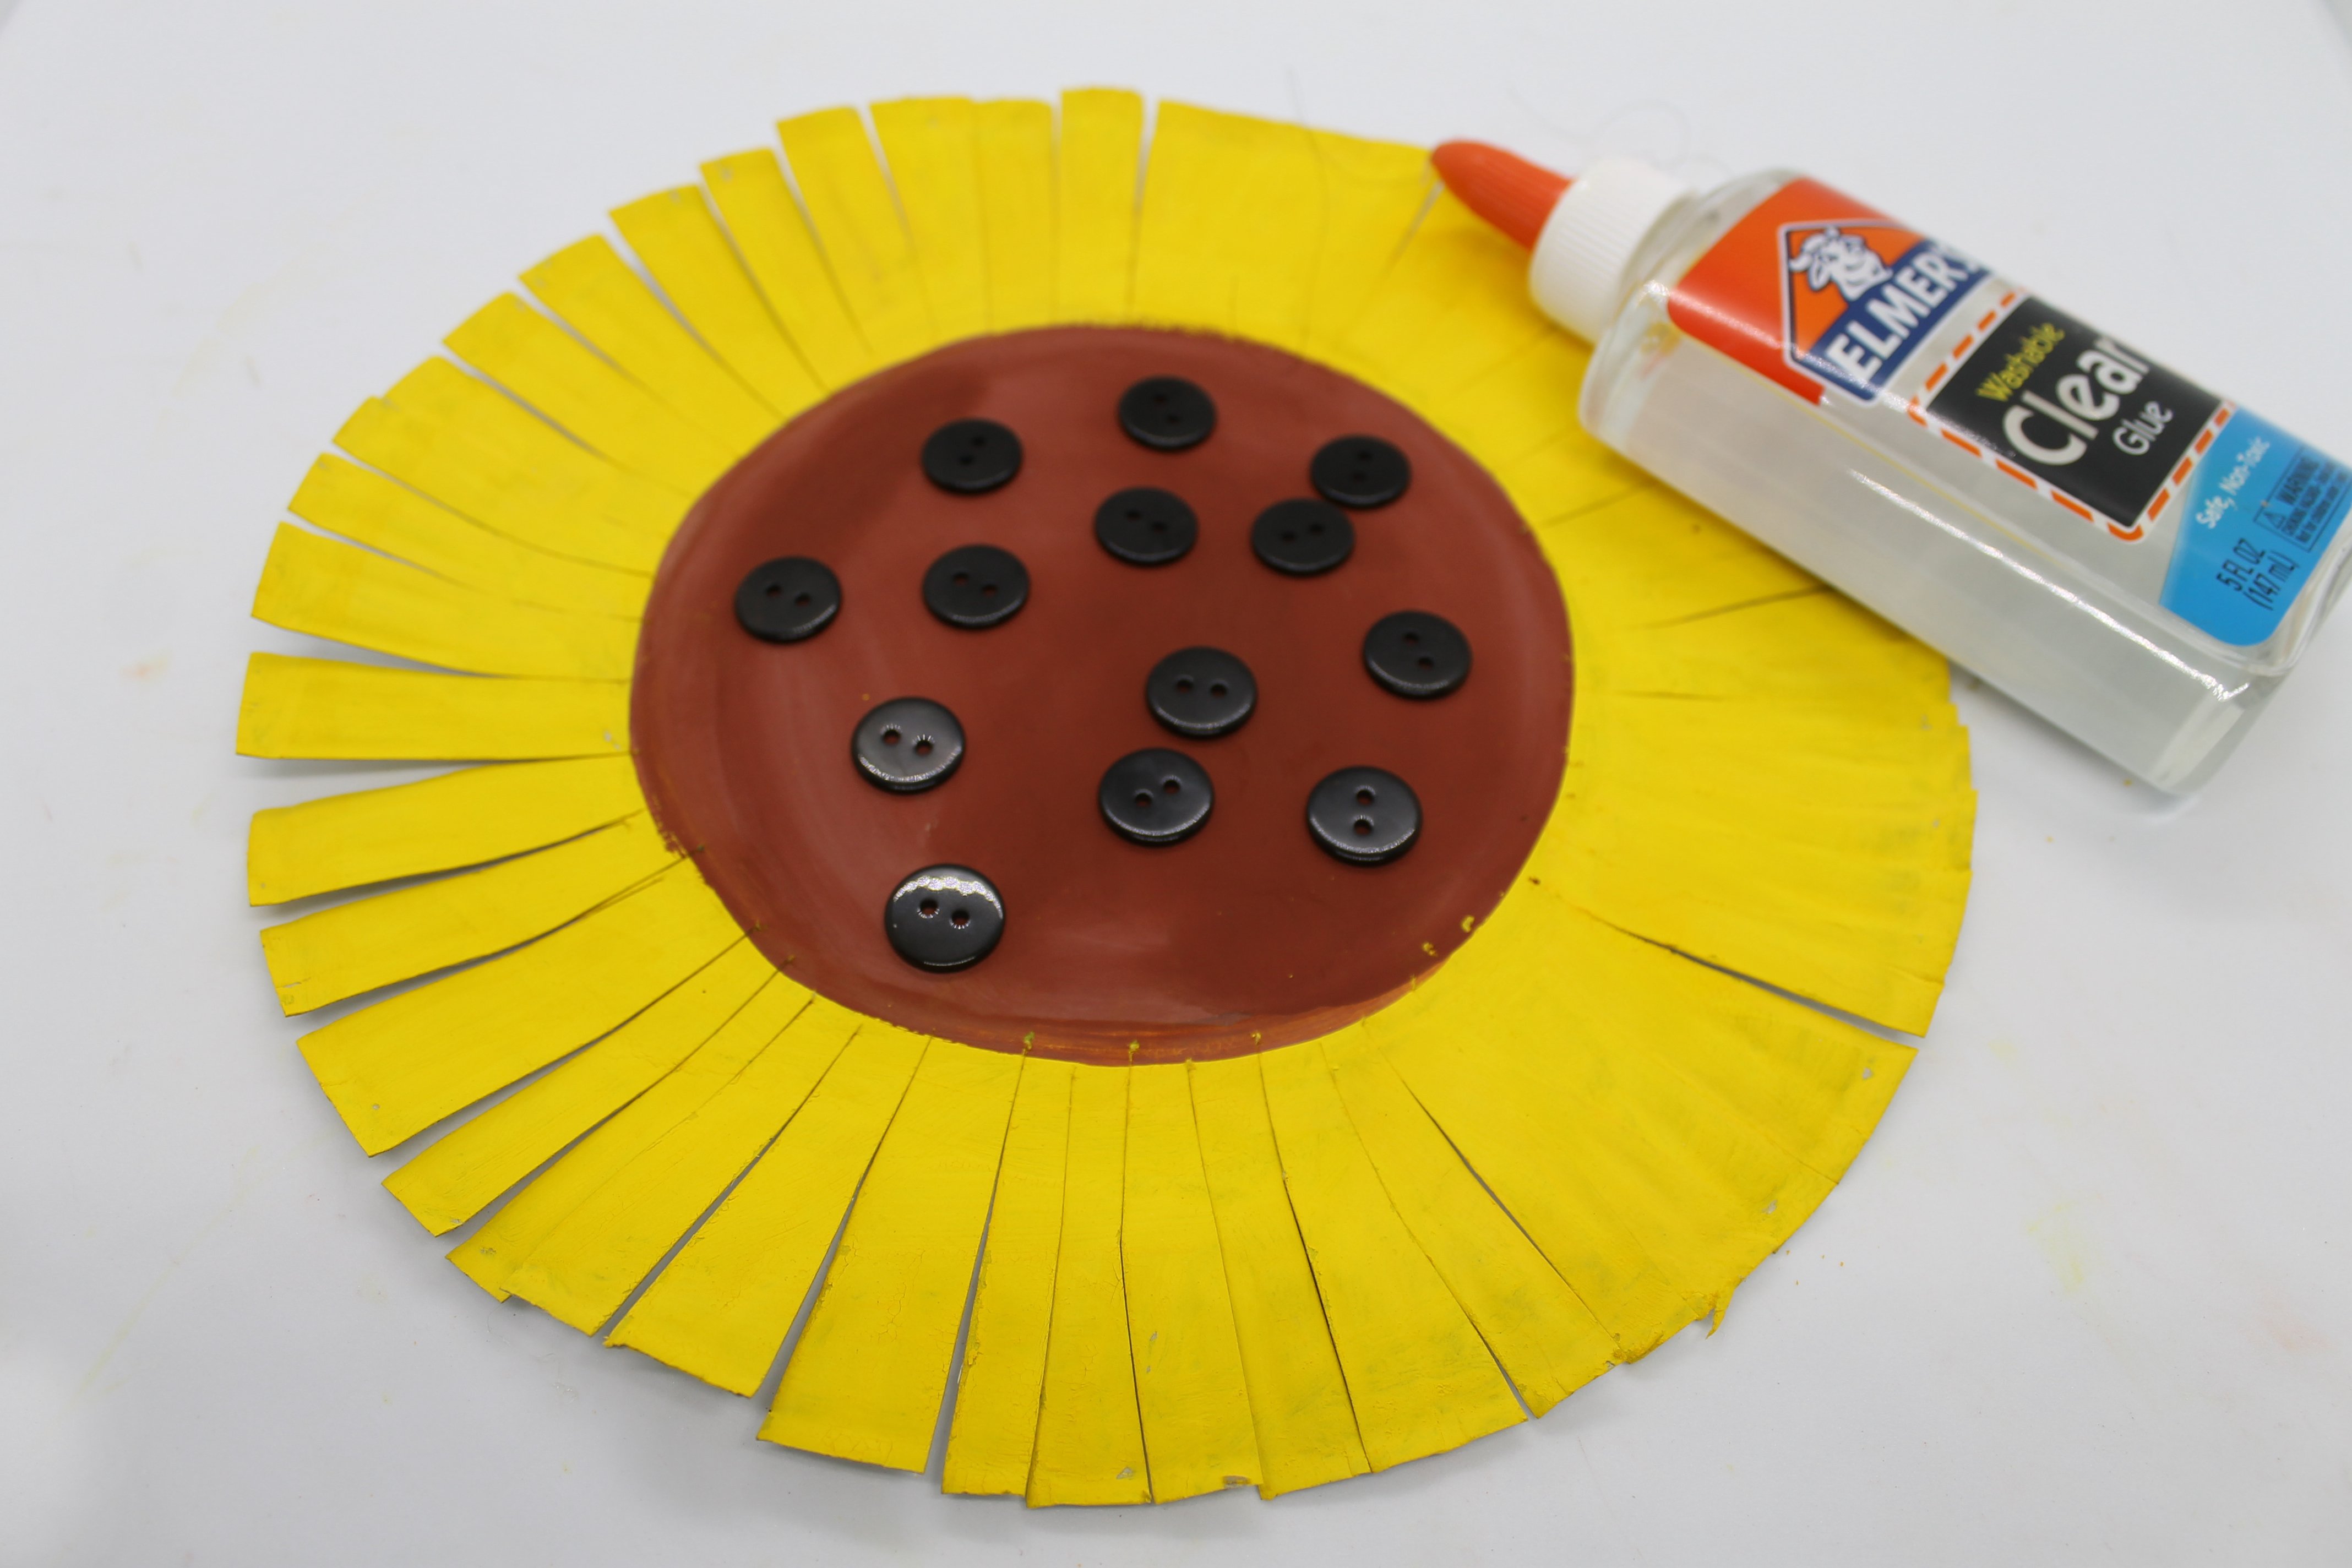 How to Make a Paper Plate Sunflower - Step 9